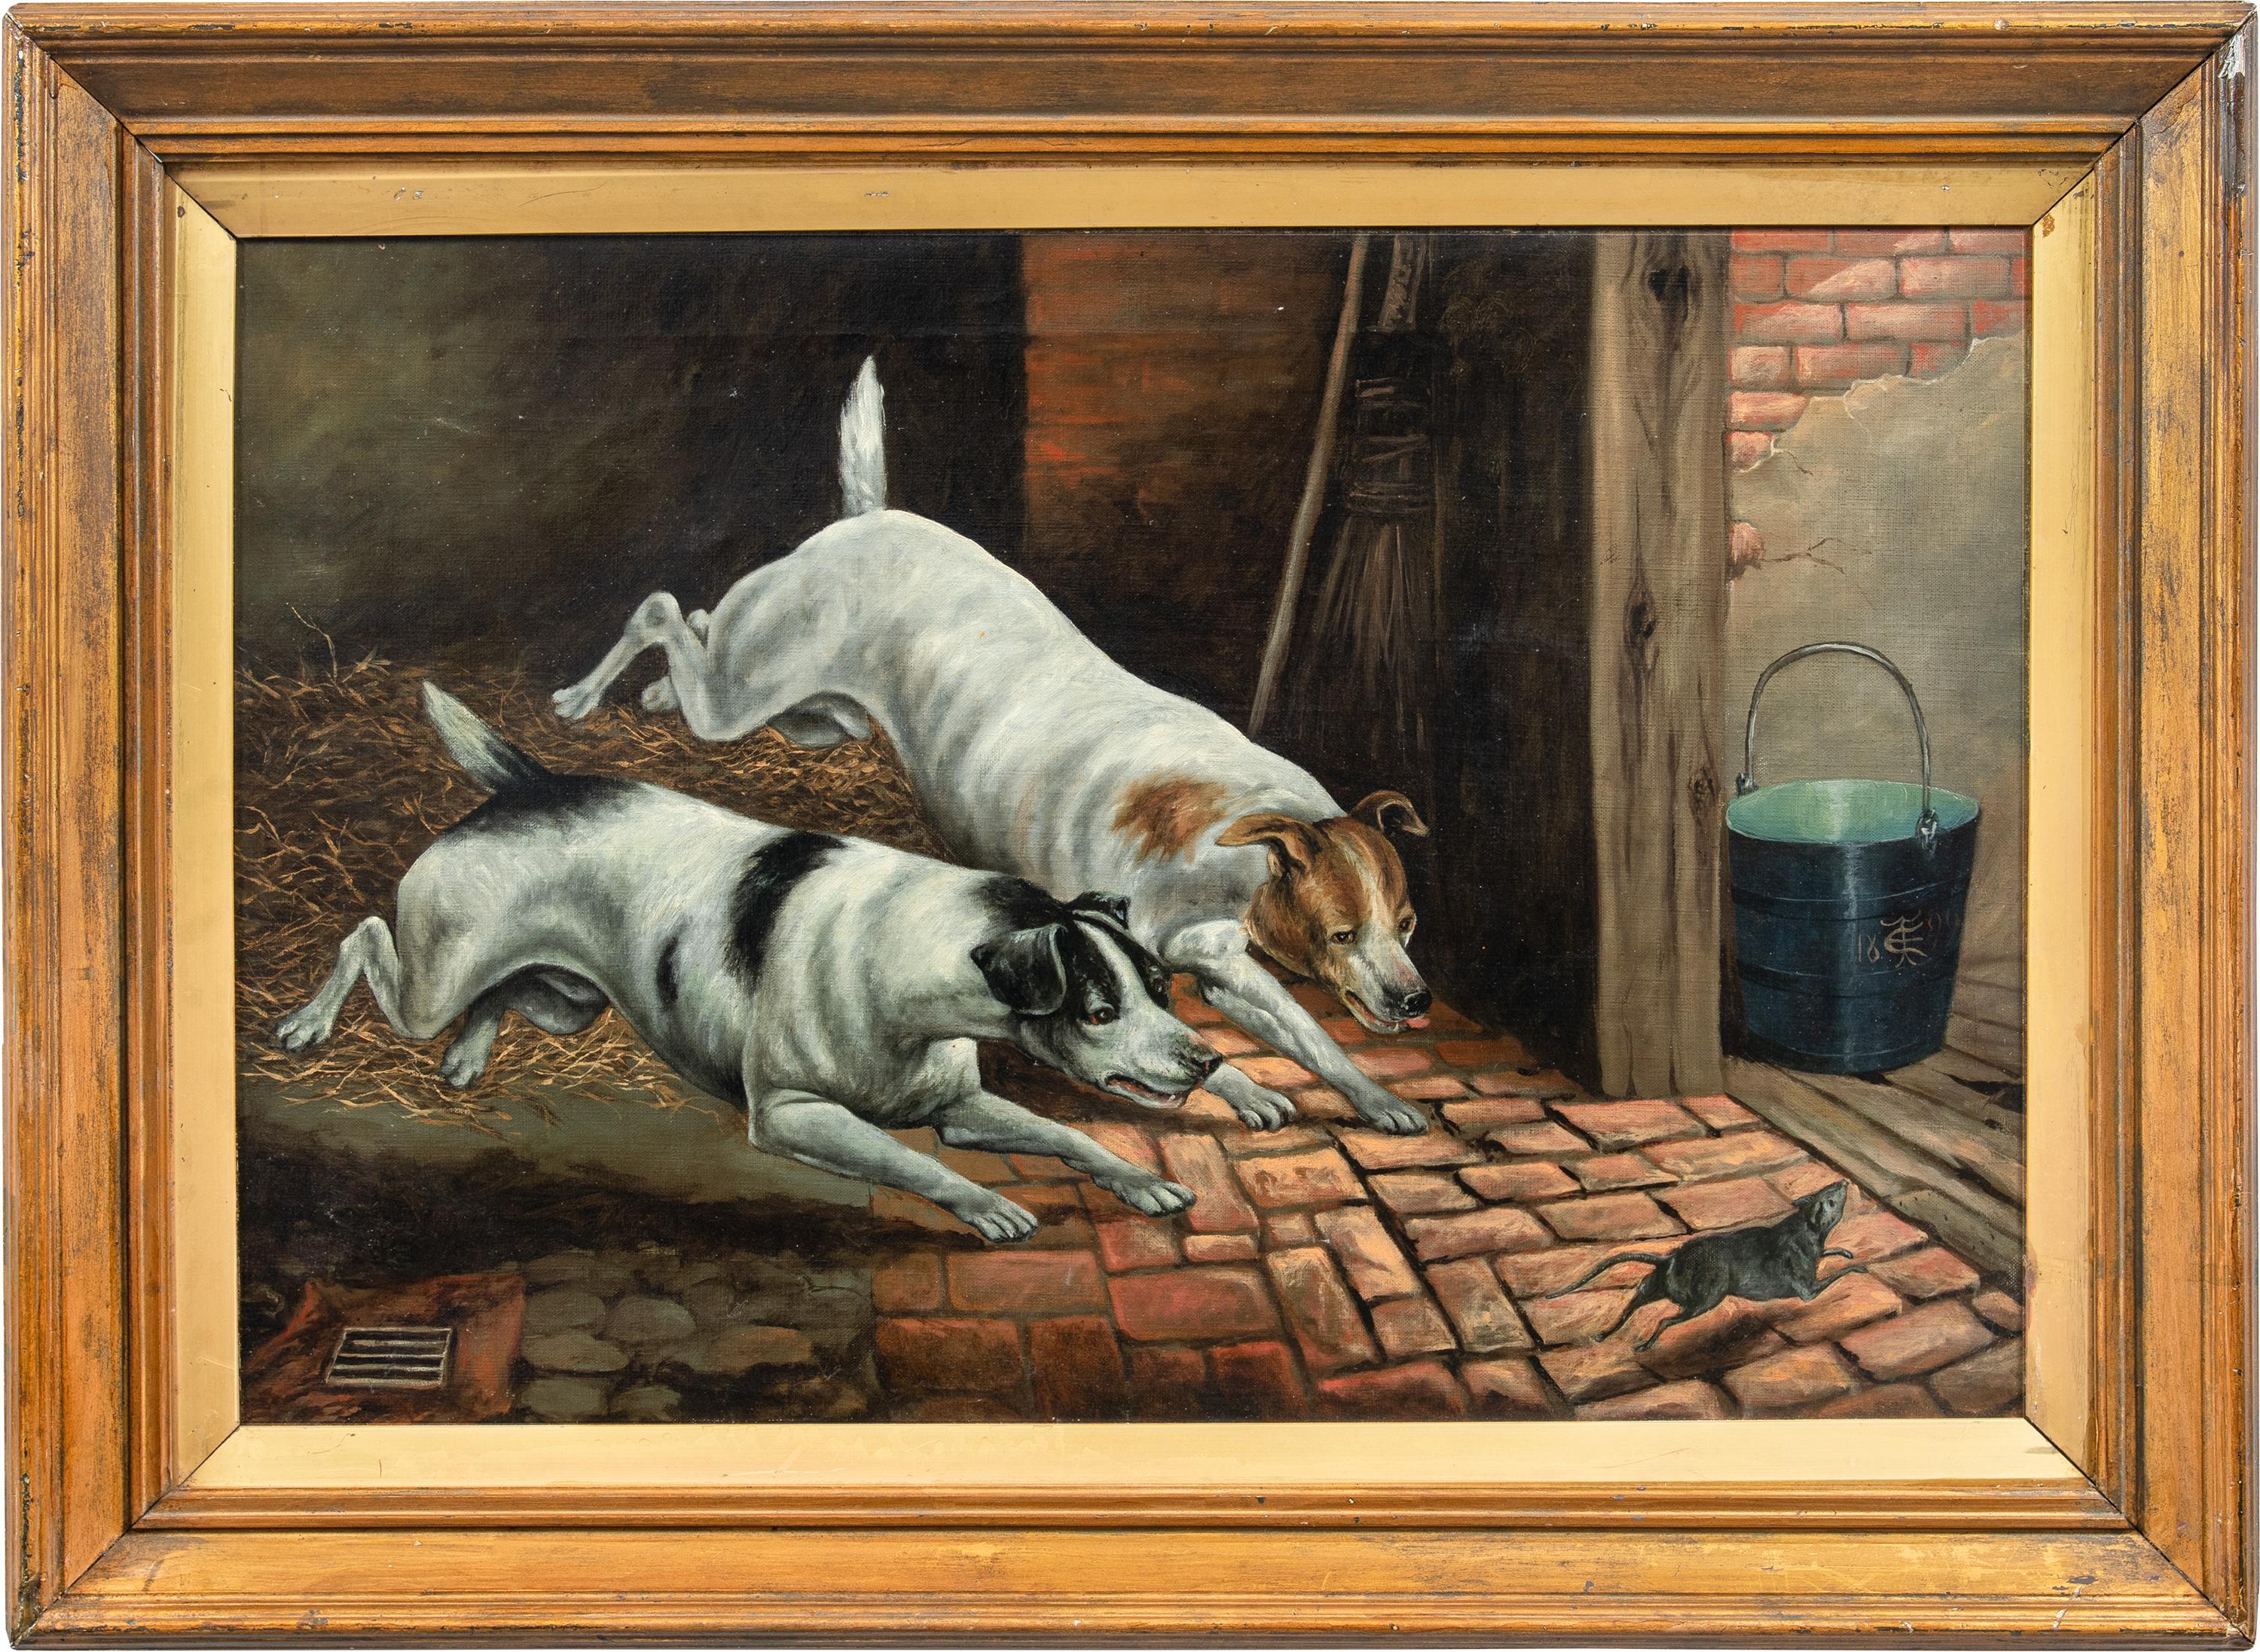 Unknown Animal Painting - Verist continental painter - Late 19th century (1899) animalier painting - Dogs 